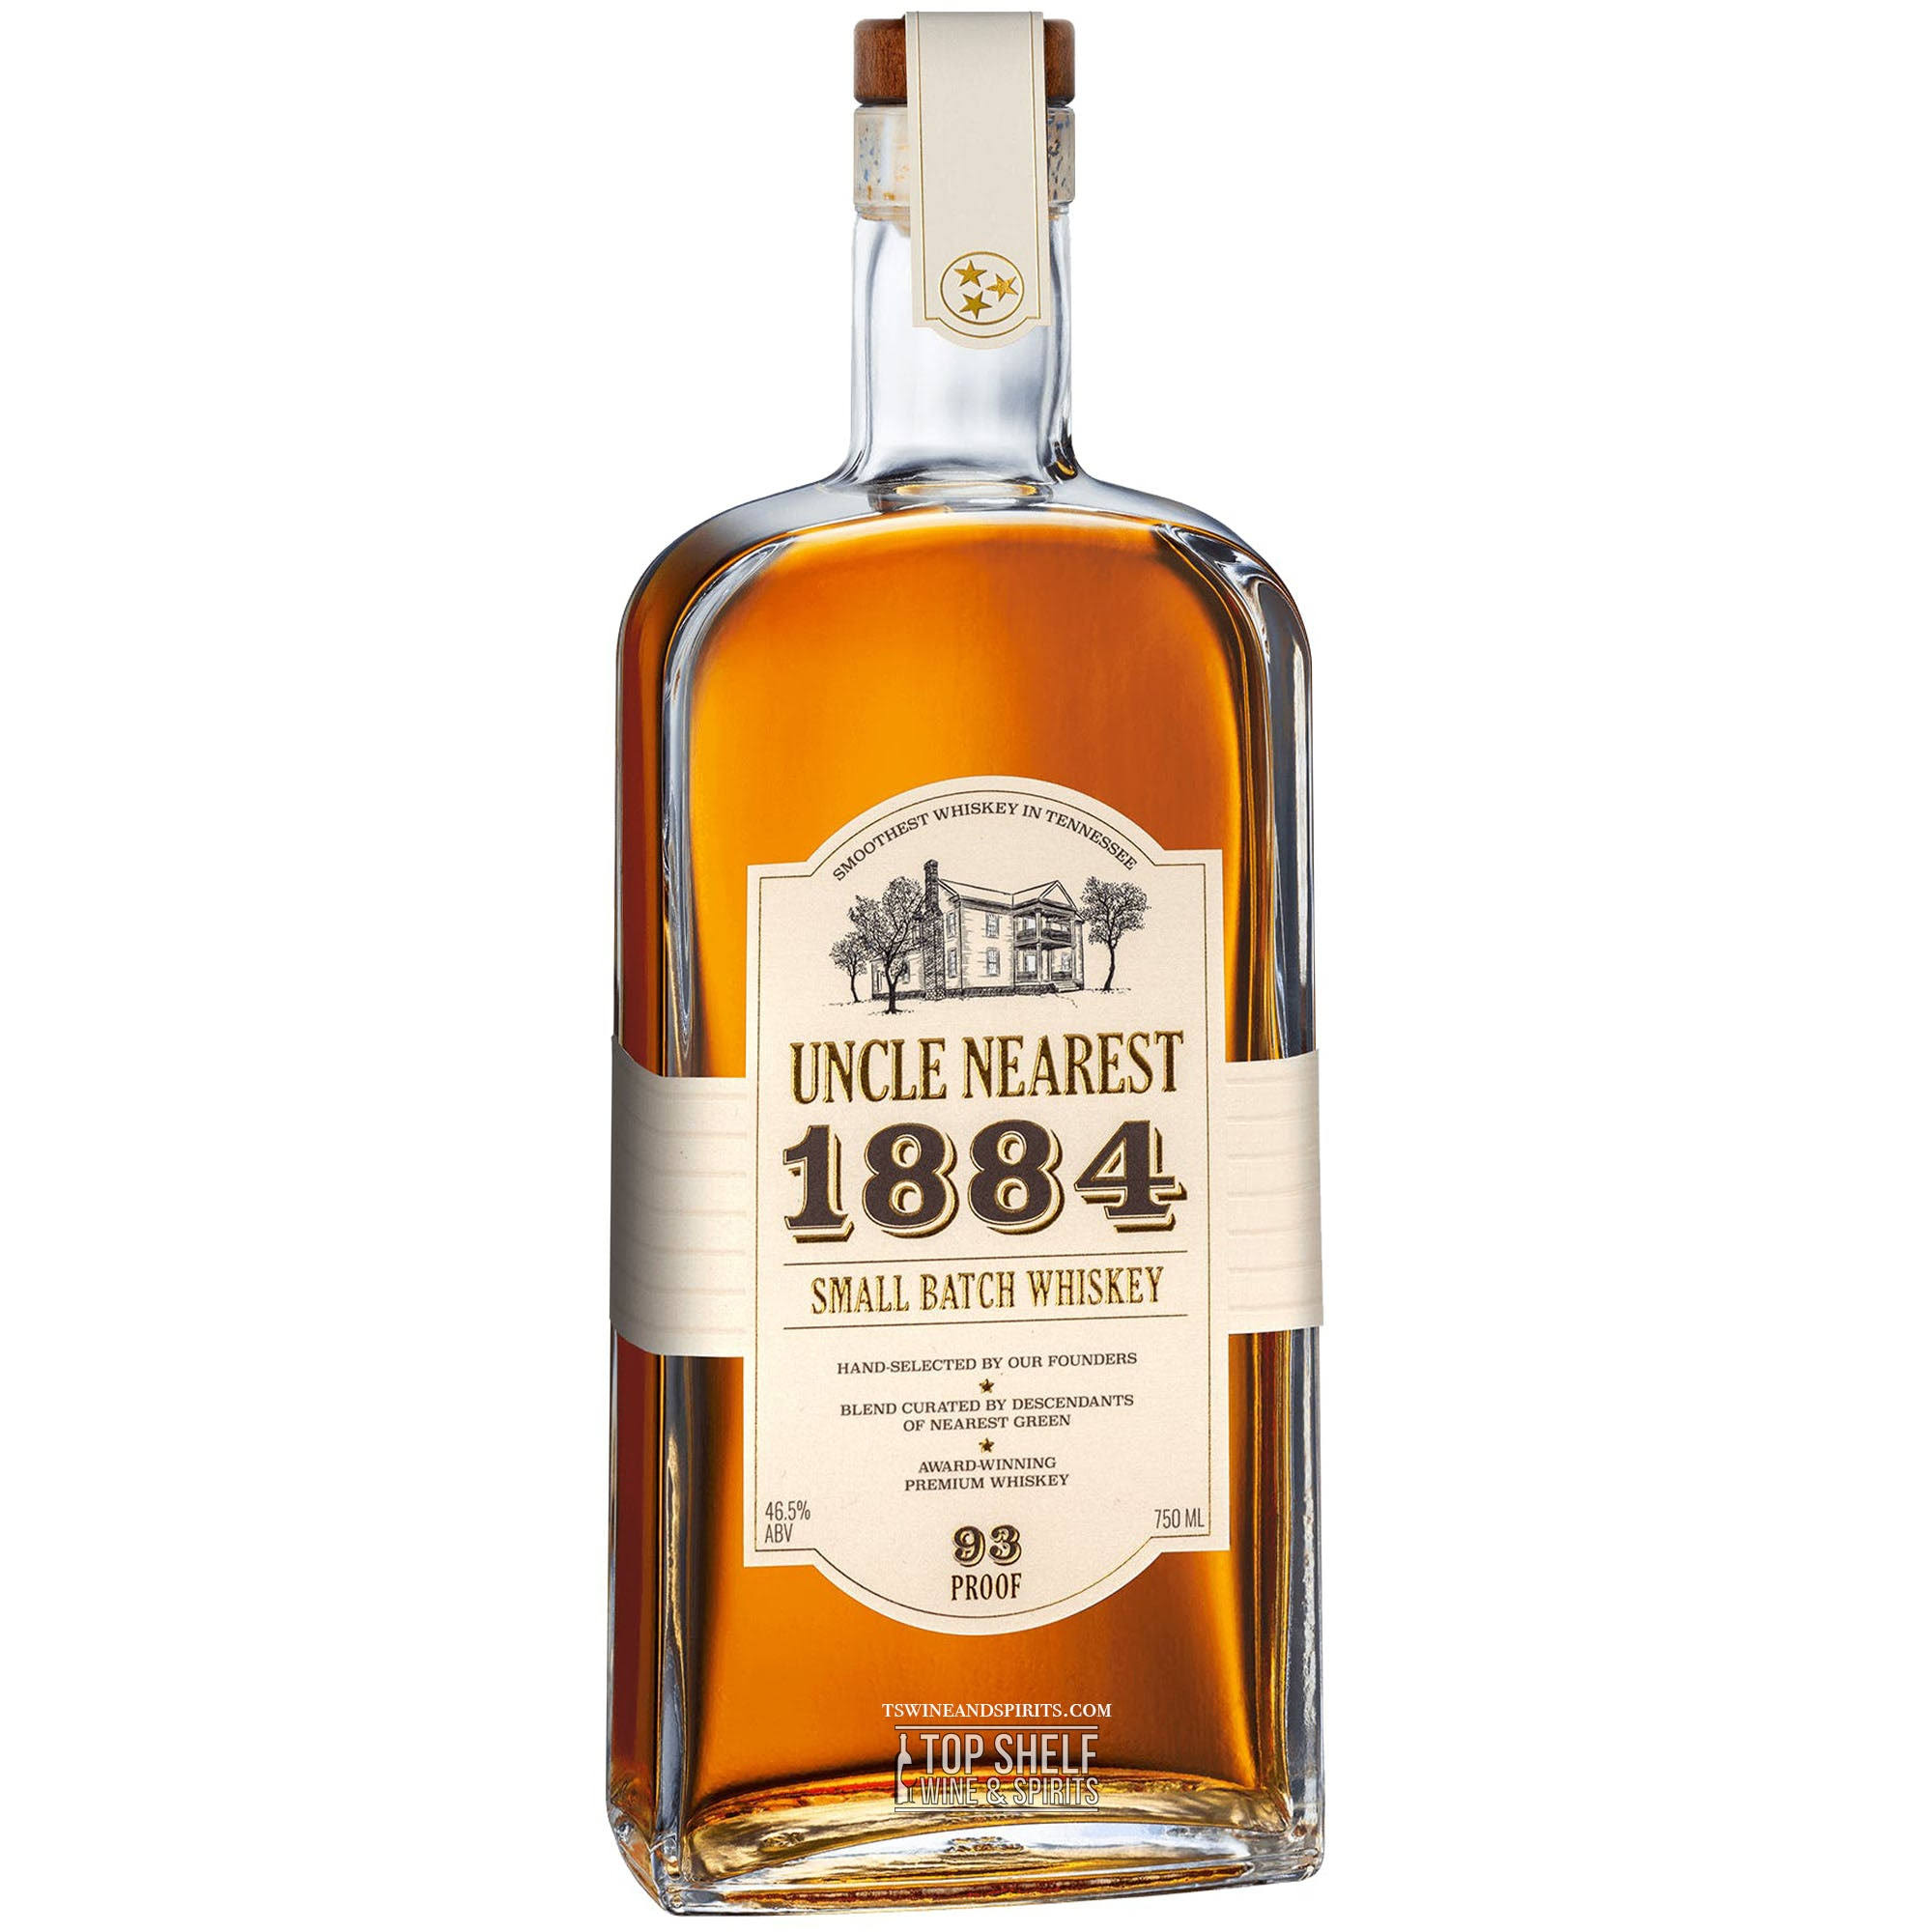 Uncle Nearest Whiskey, Small Batch, 1884 - 750 ml